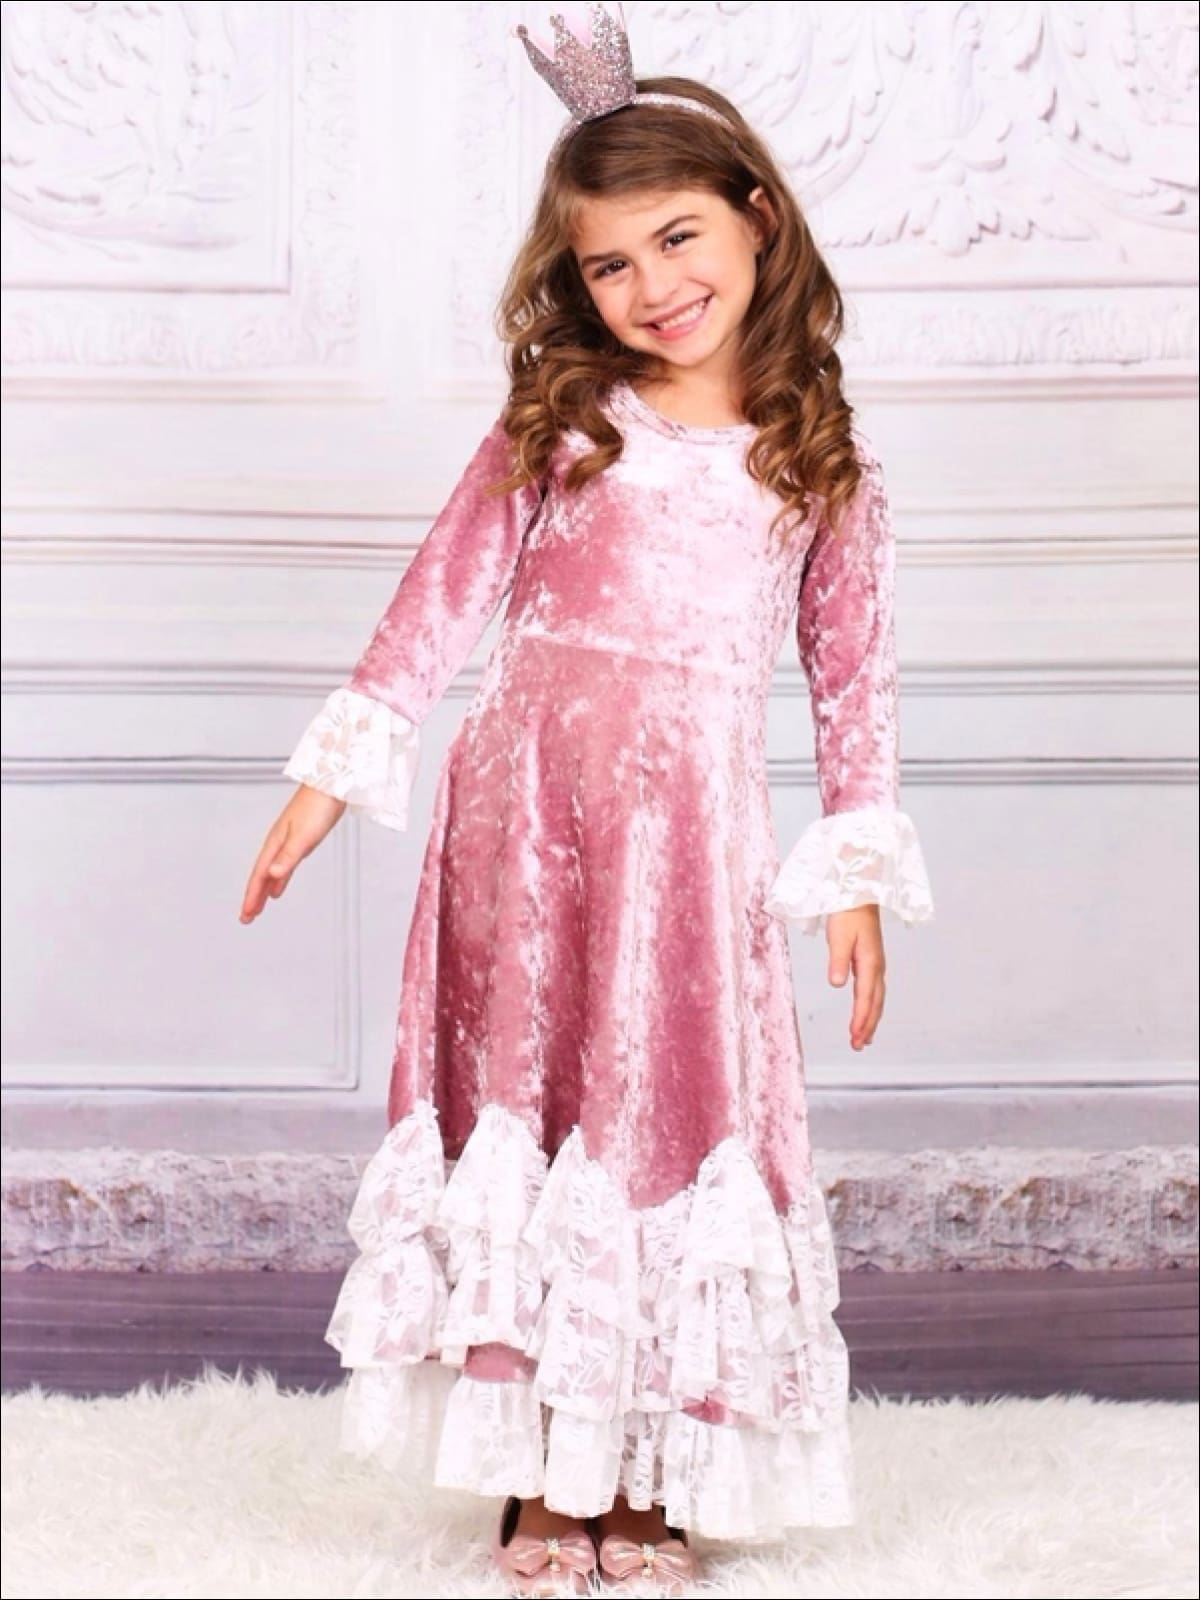 Girls Pink Velvet Princess Maxi Holiday Dress with Lace Ruffled Waves - Girls Spring Dressy Dress